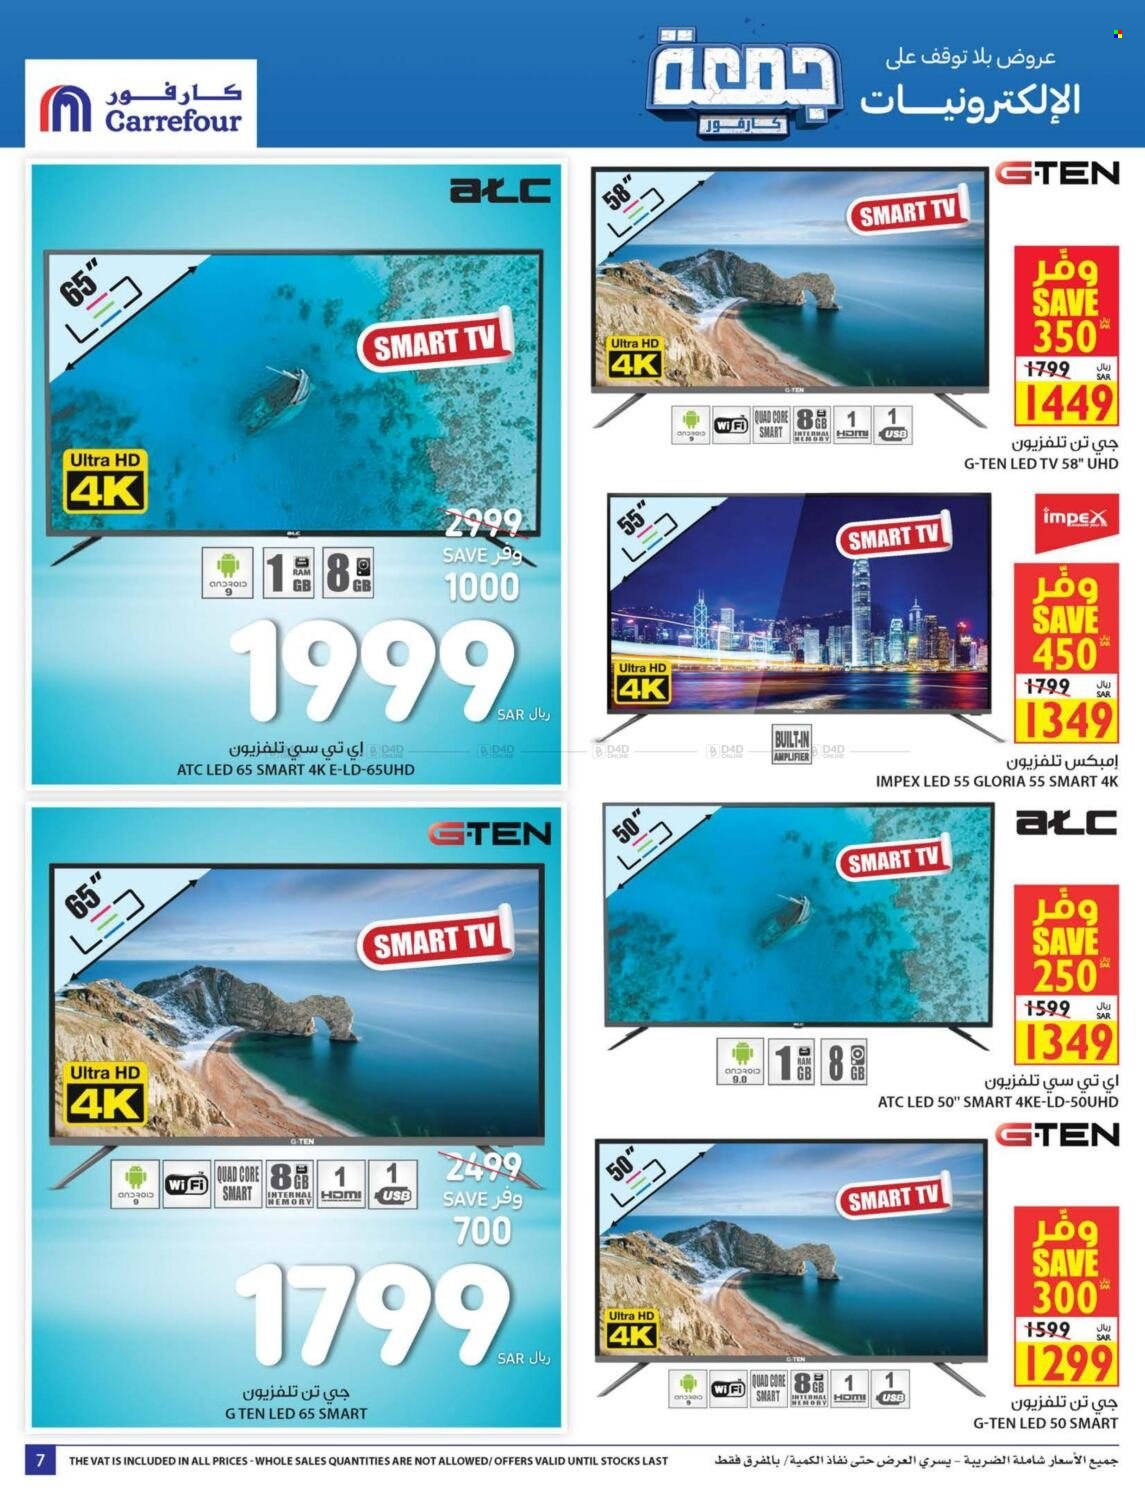 Carrefour flyer  - 10.28.2021 - 11.23.2021. Page 7.